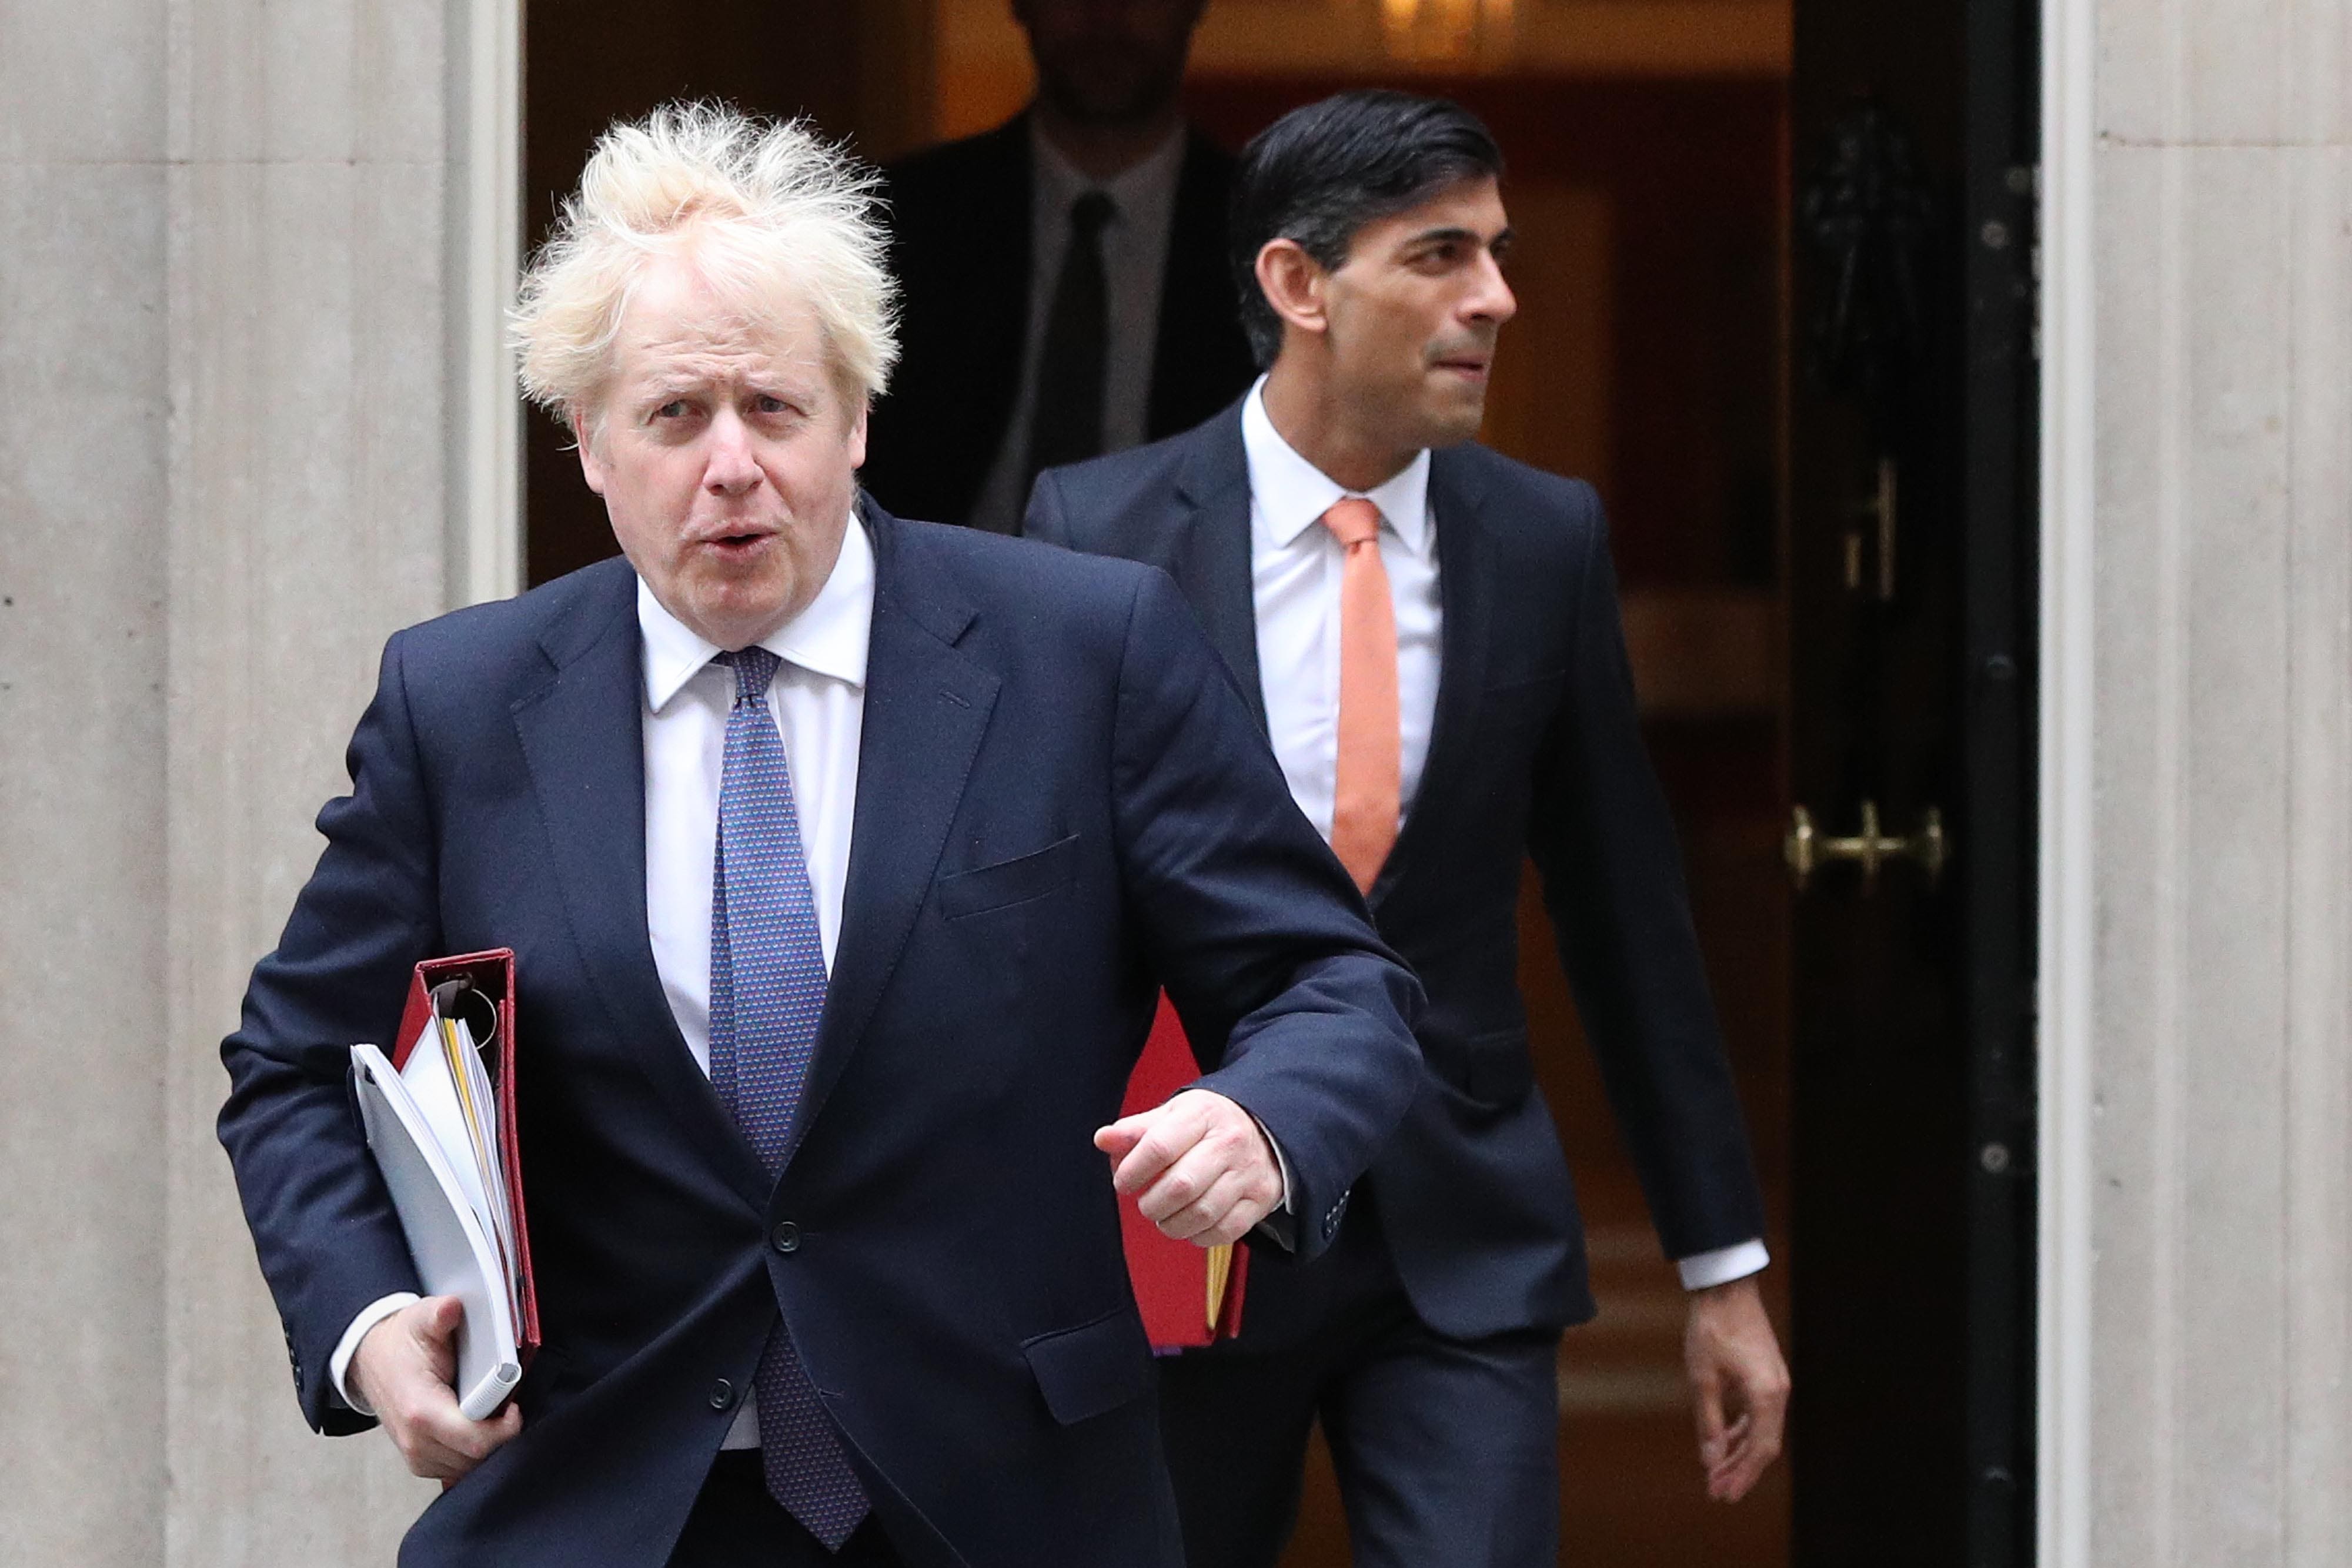 Boris Johnson (left) and Rishi Sunak leave 10 Downing Street in 2020 when they were prime minister and chancellor, respectively (PA)